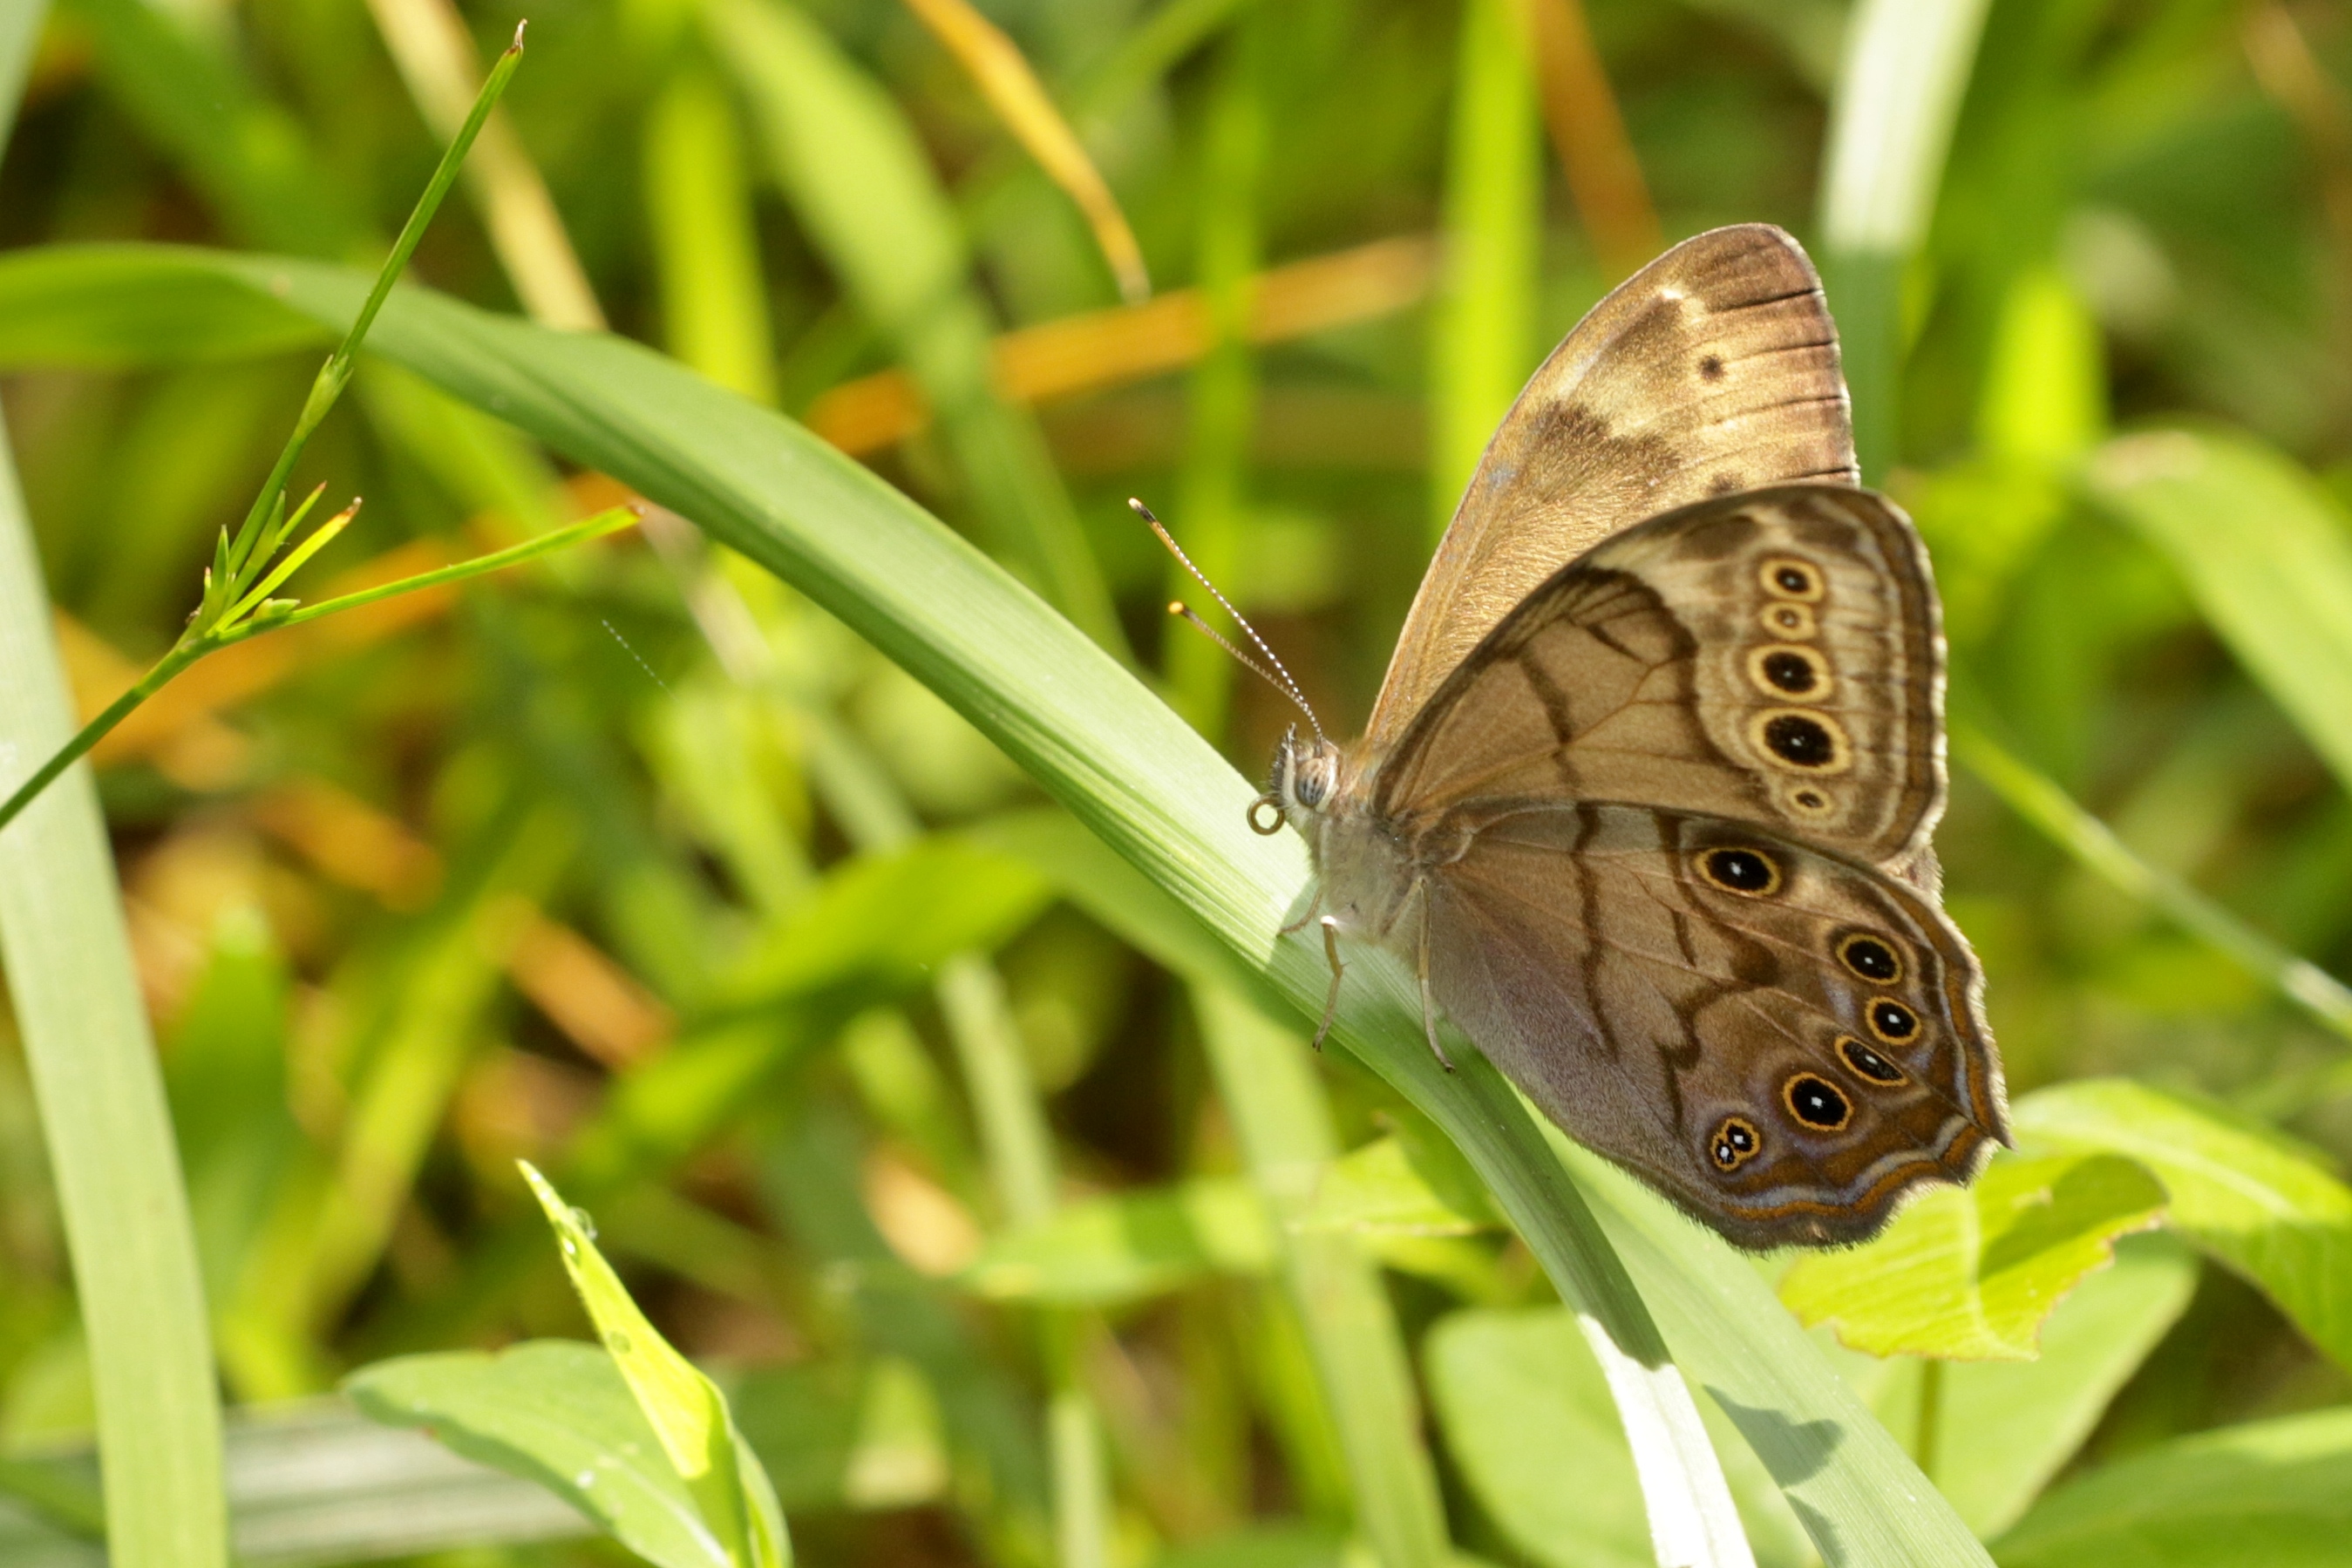 A Northern pearly-eye butterfly on a blade of grass.